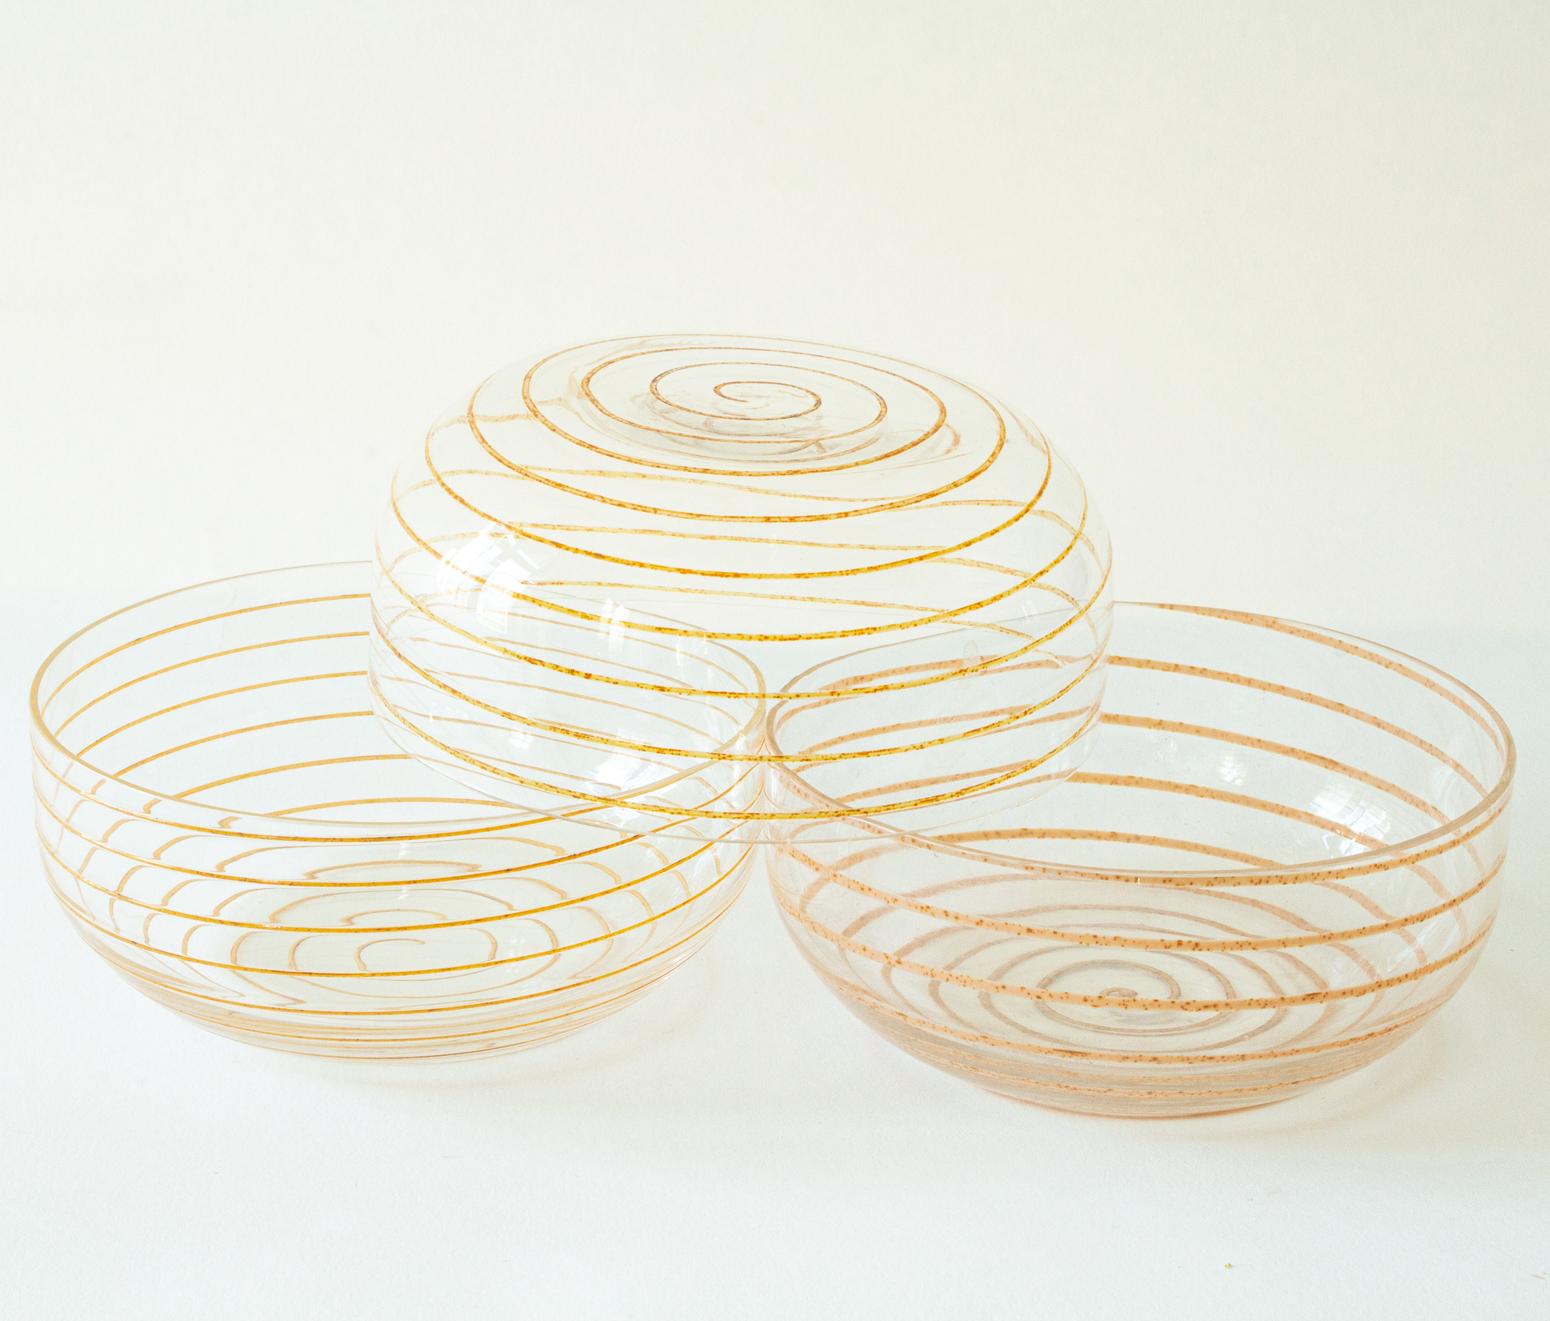 10 Mid-Century Modern Cenedese Murano Glass Serving Bowls with Spiral In Good Condition For Sale In Stockholm, SE